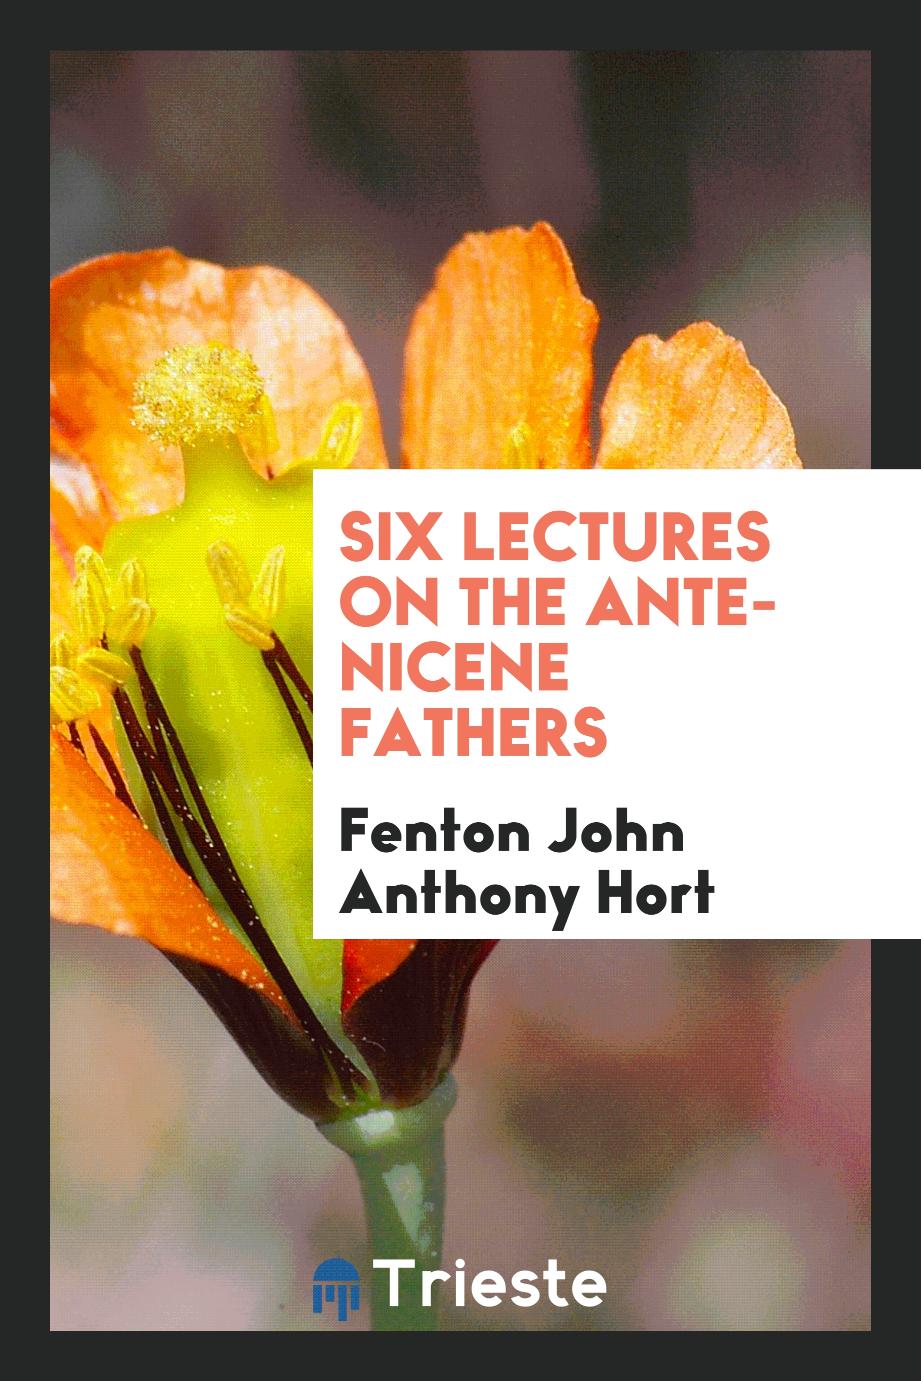 Six Lectures on the Ante-Nicene Fathers